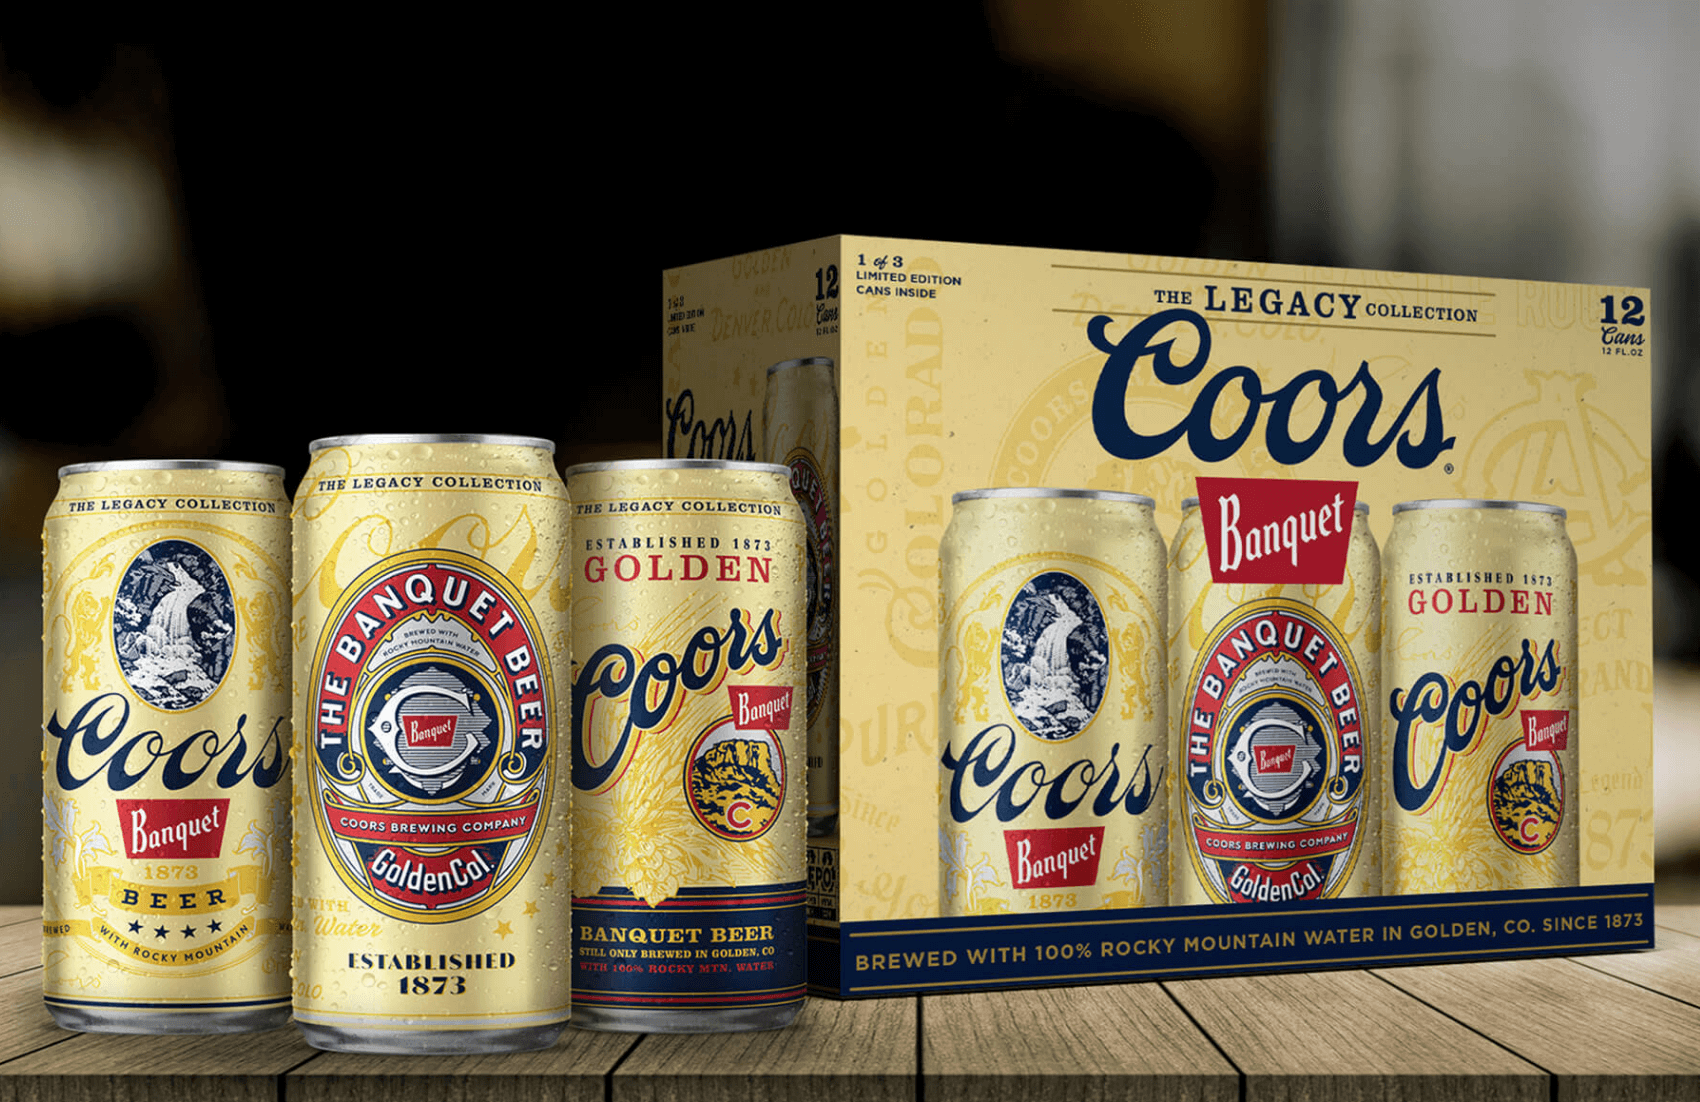 Coors Banquet cans